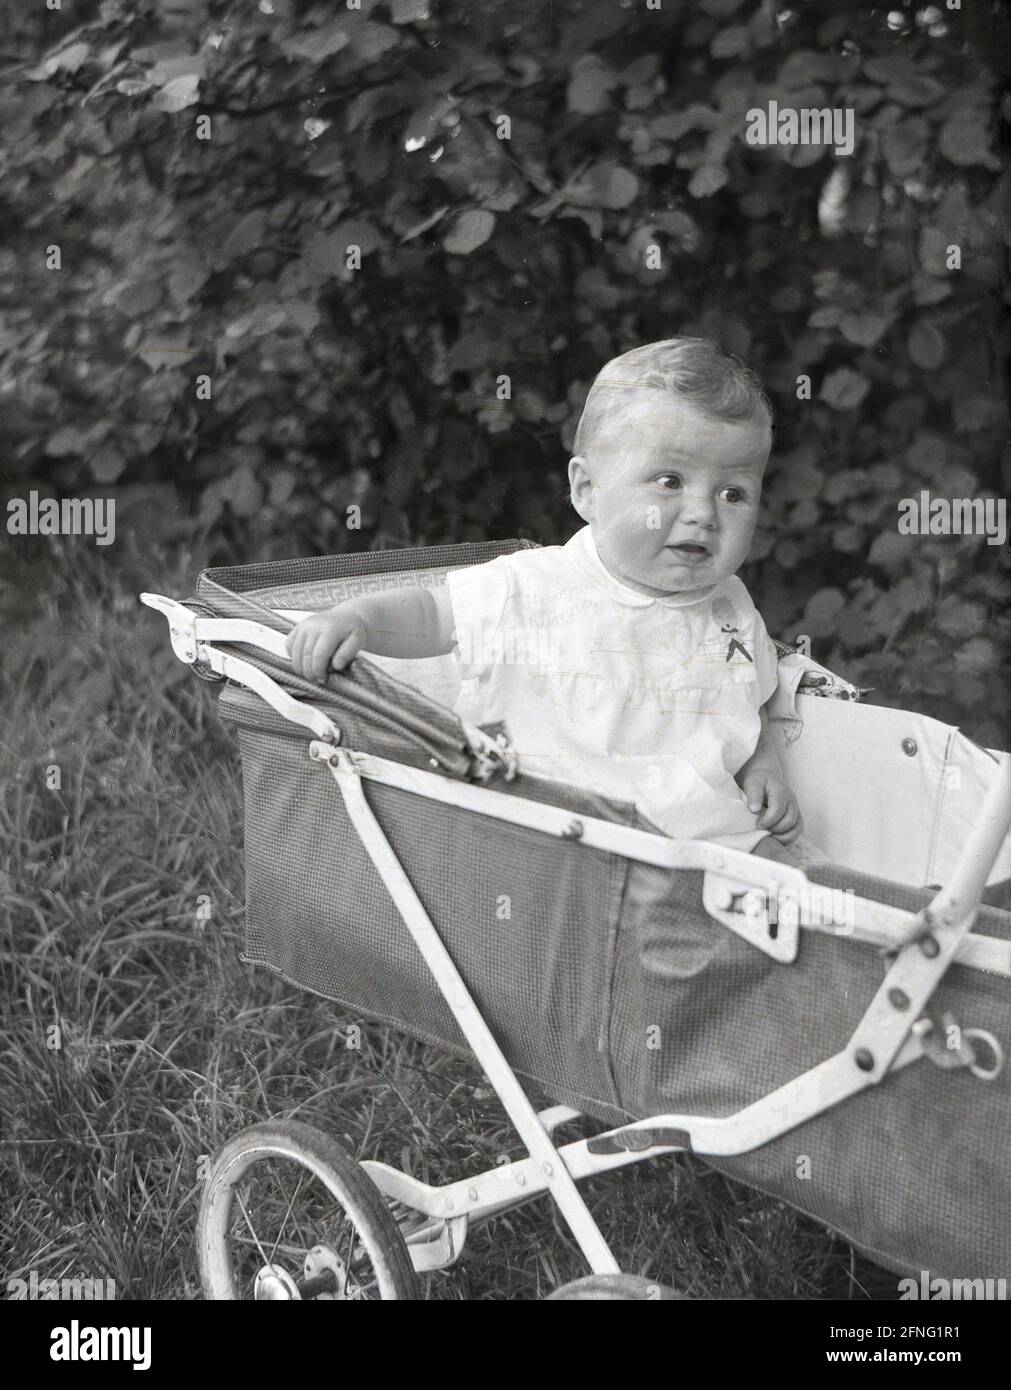 1950s, historical, outside parked on some grass, an infant boy sitting up in a canvas covered, metal framed, wire-wheeled, folding pushchair of the era, made by Tan-Sad, England, UK. Founded in Birmingham in 1922, Tan-Sad made constructional toys, metal factory chairs and childrens push chairs. In the 1950s and 60s the Tan-Sad name became so well-known, that it became a generic name for pushchairs. The company folded in 1975. Stock Photo